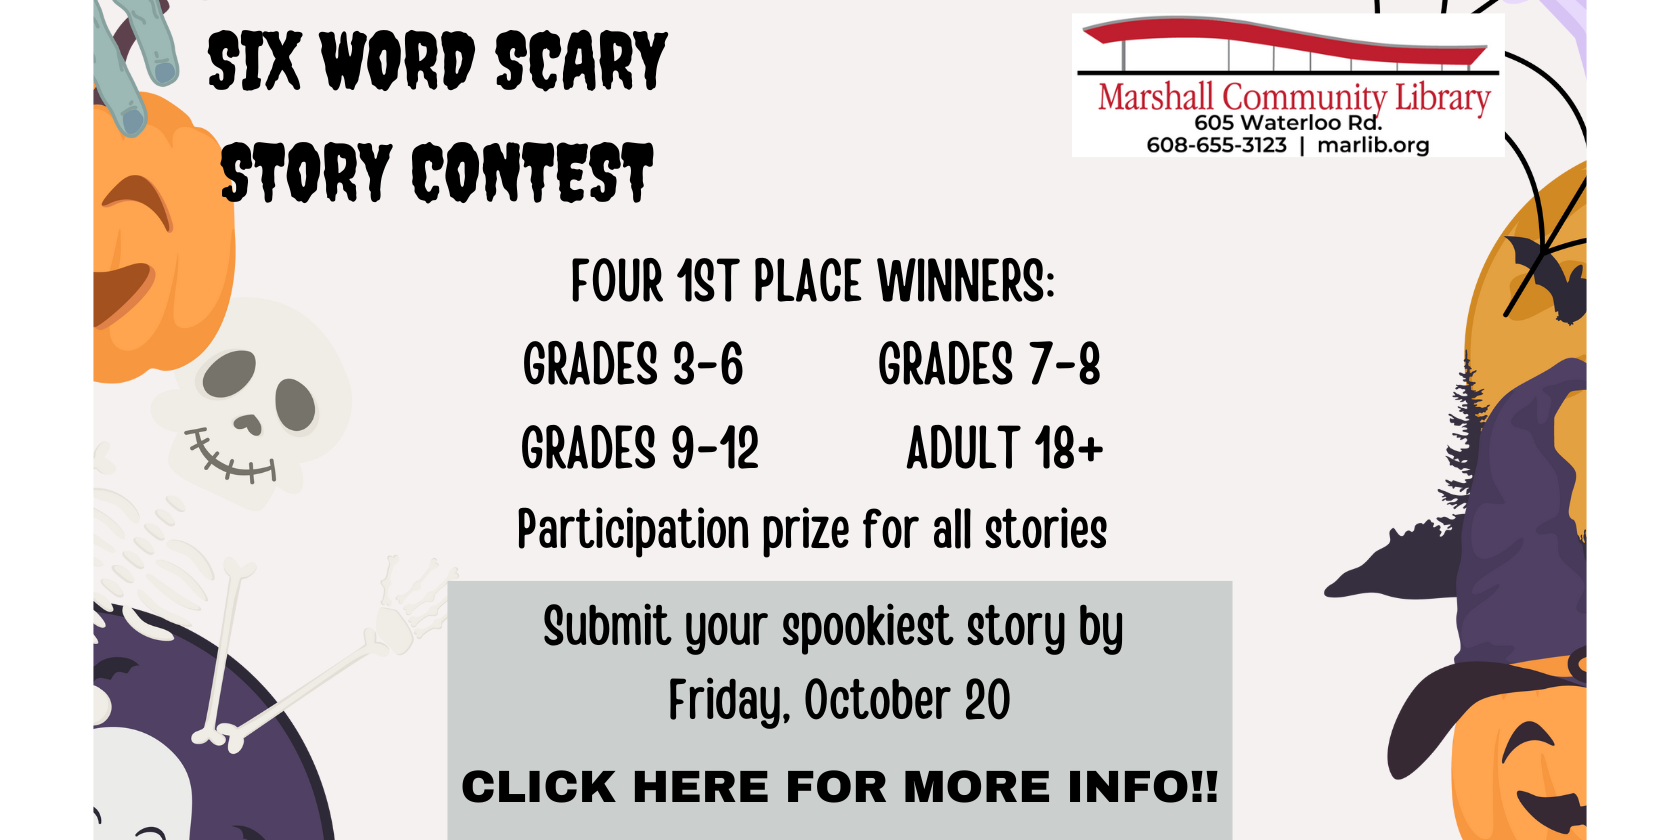 Six word scary stories in October